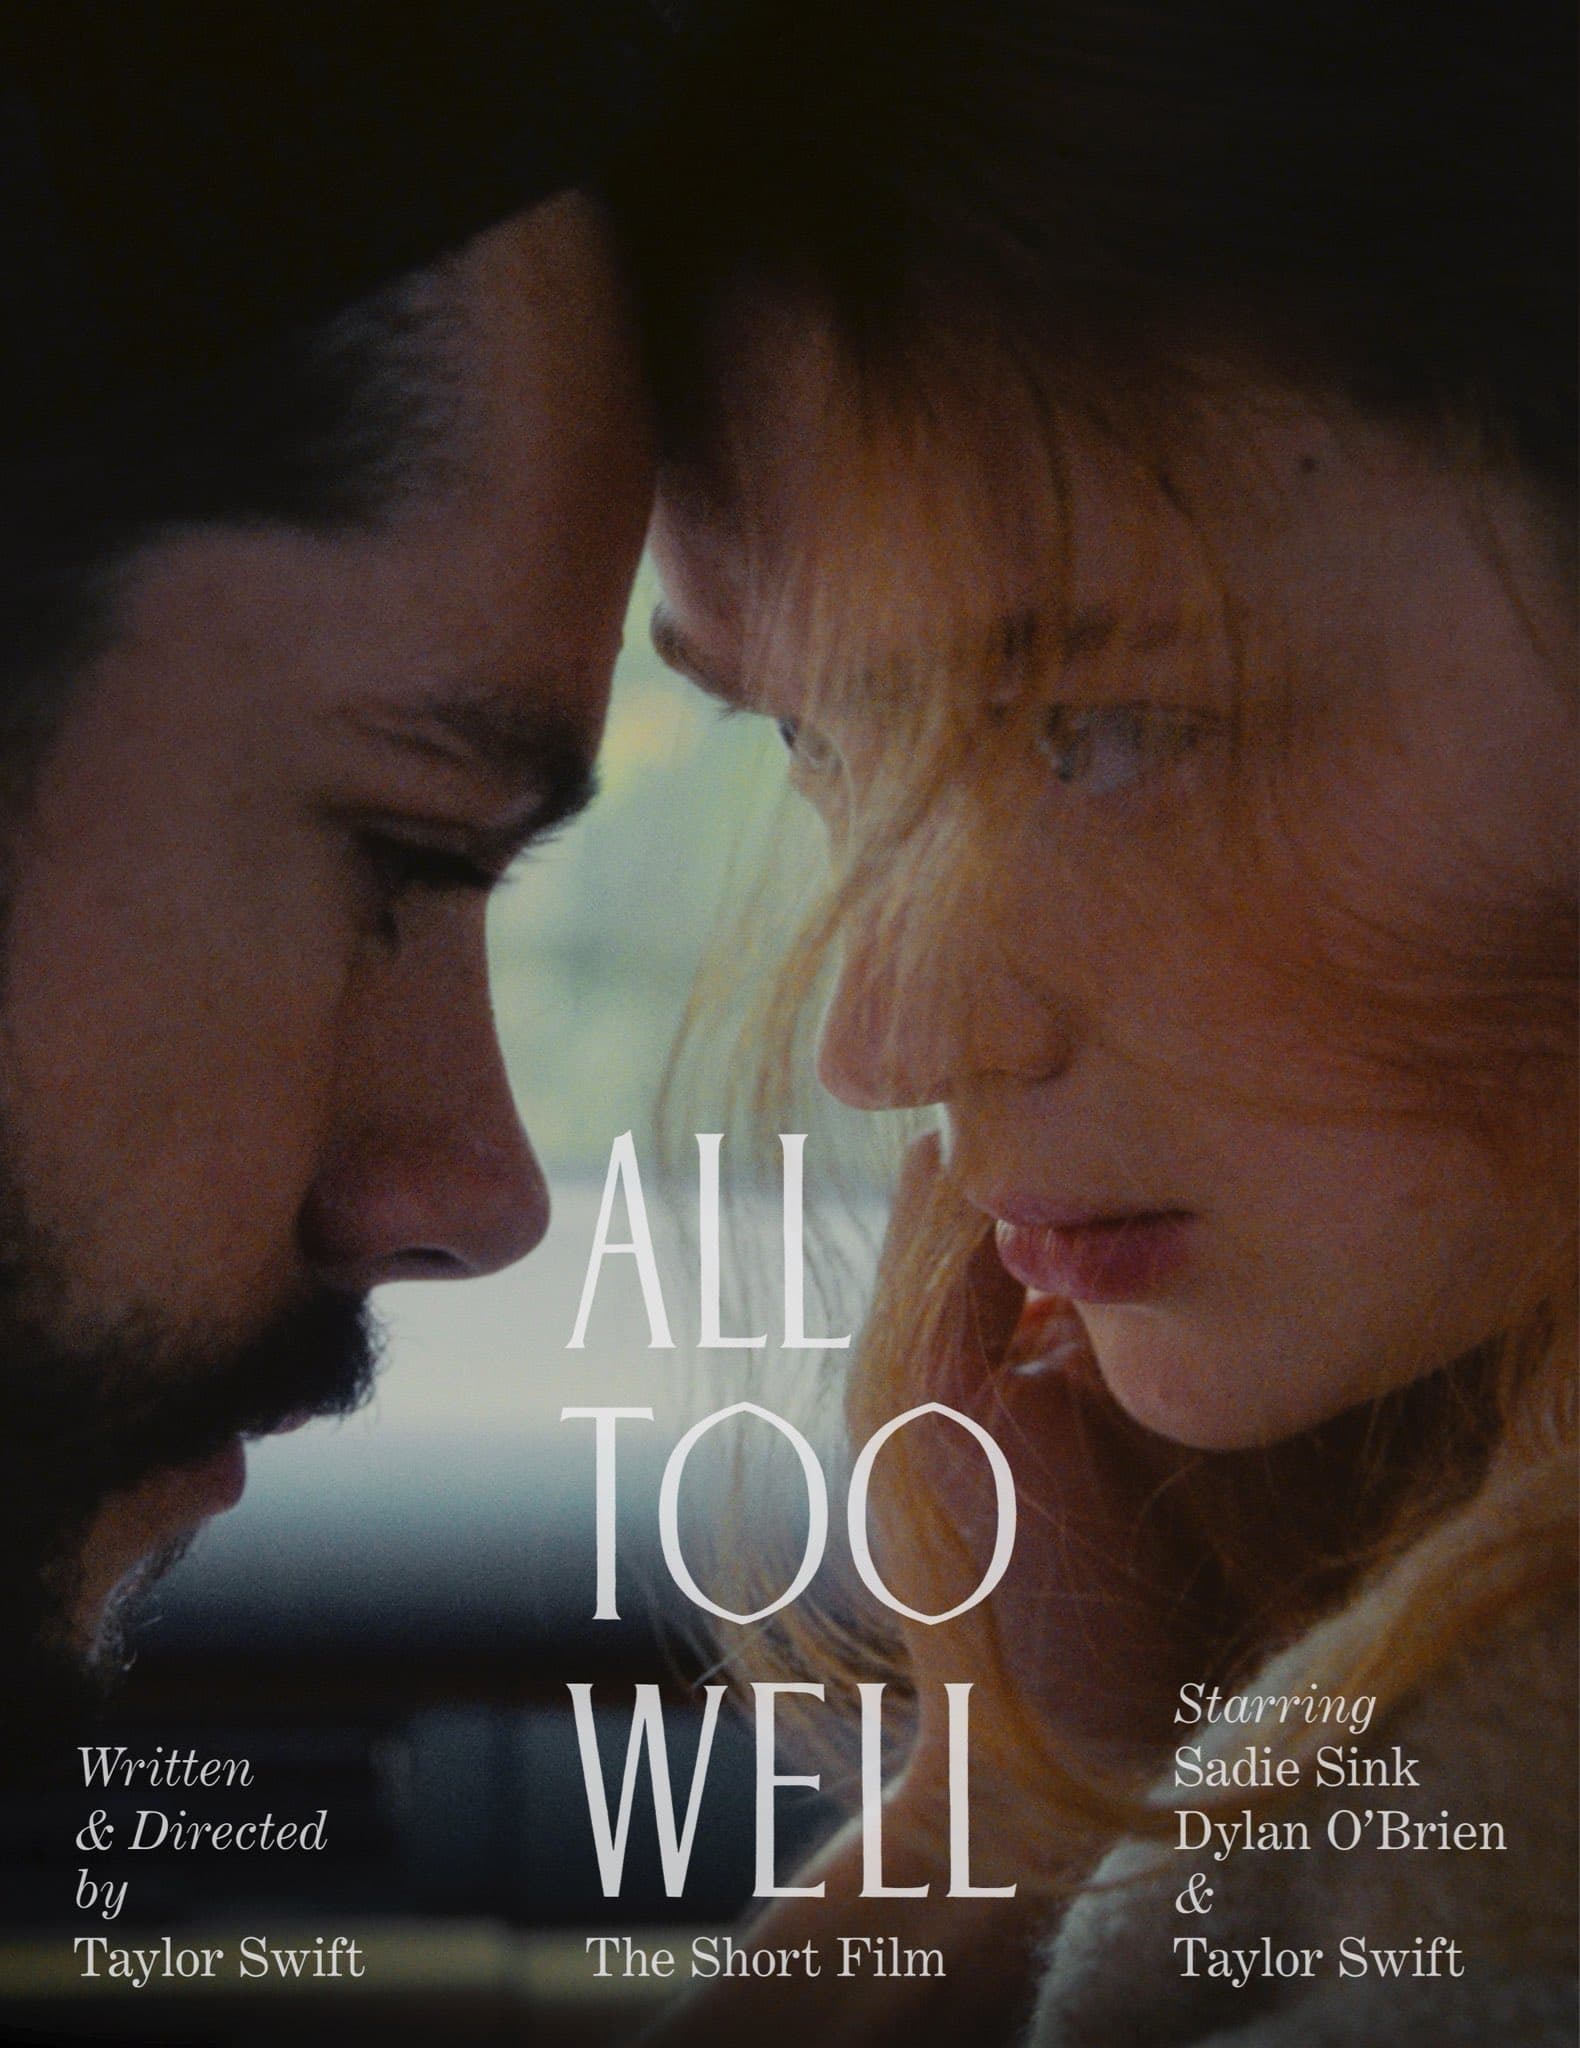 All too well short film taylor swift